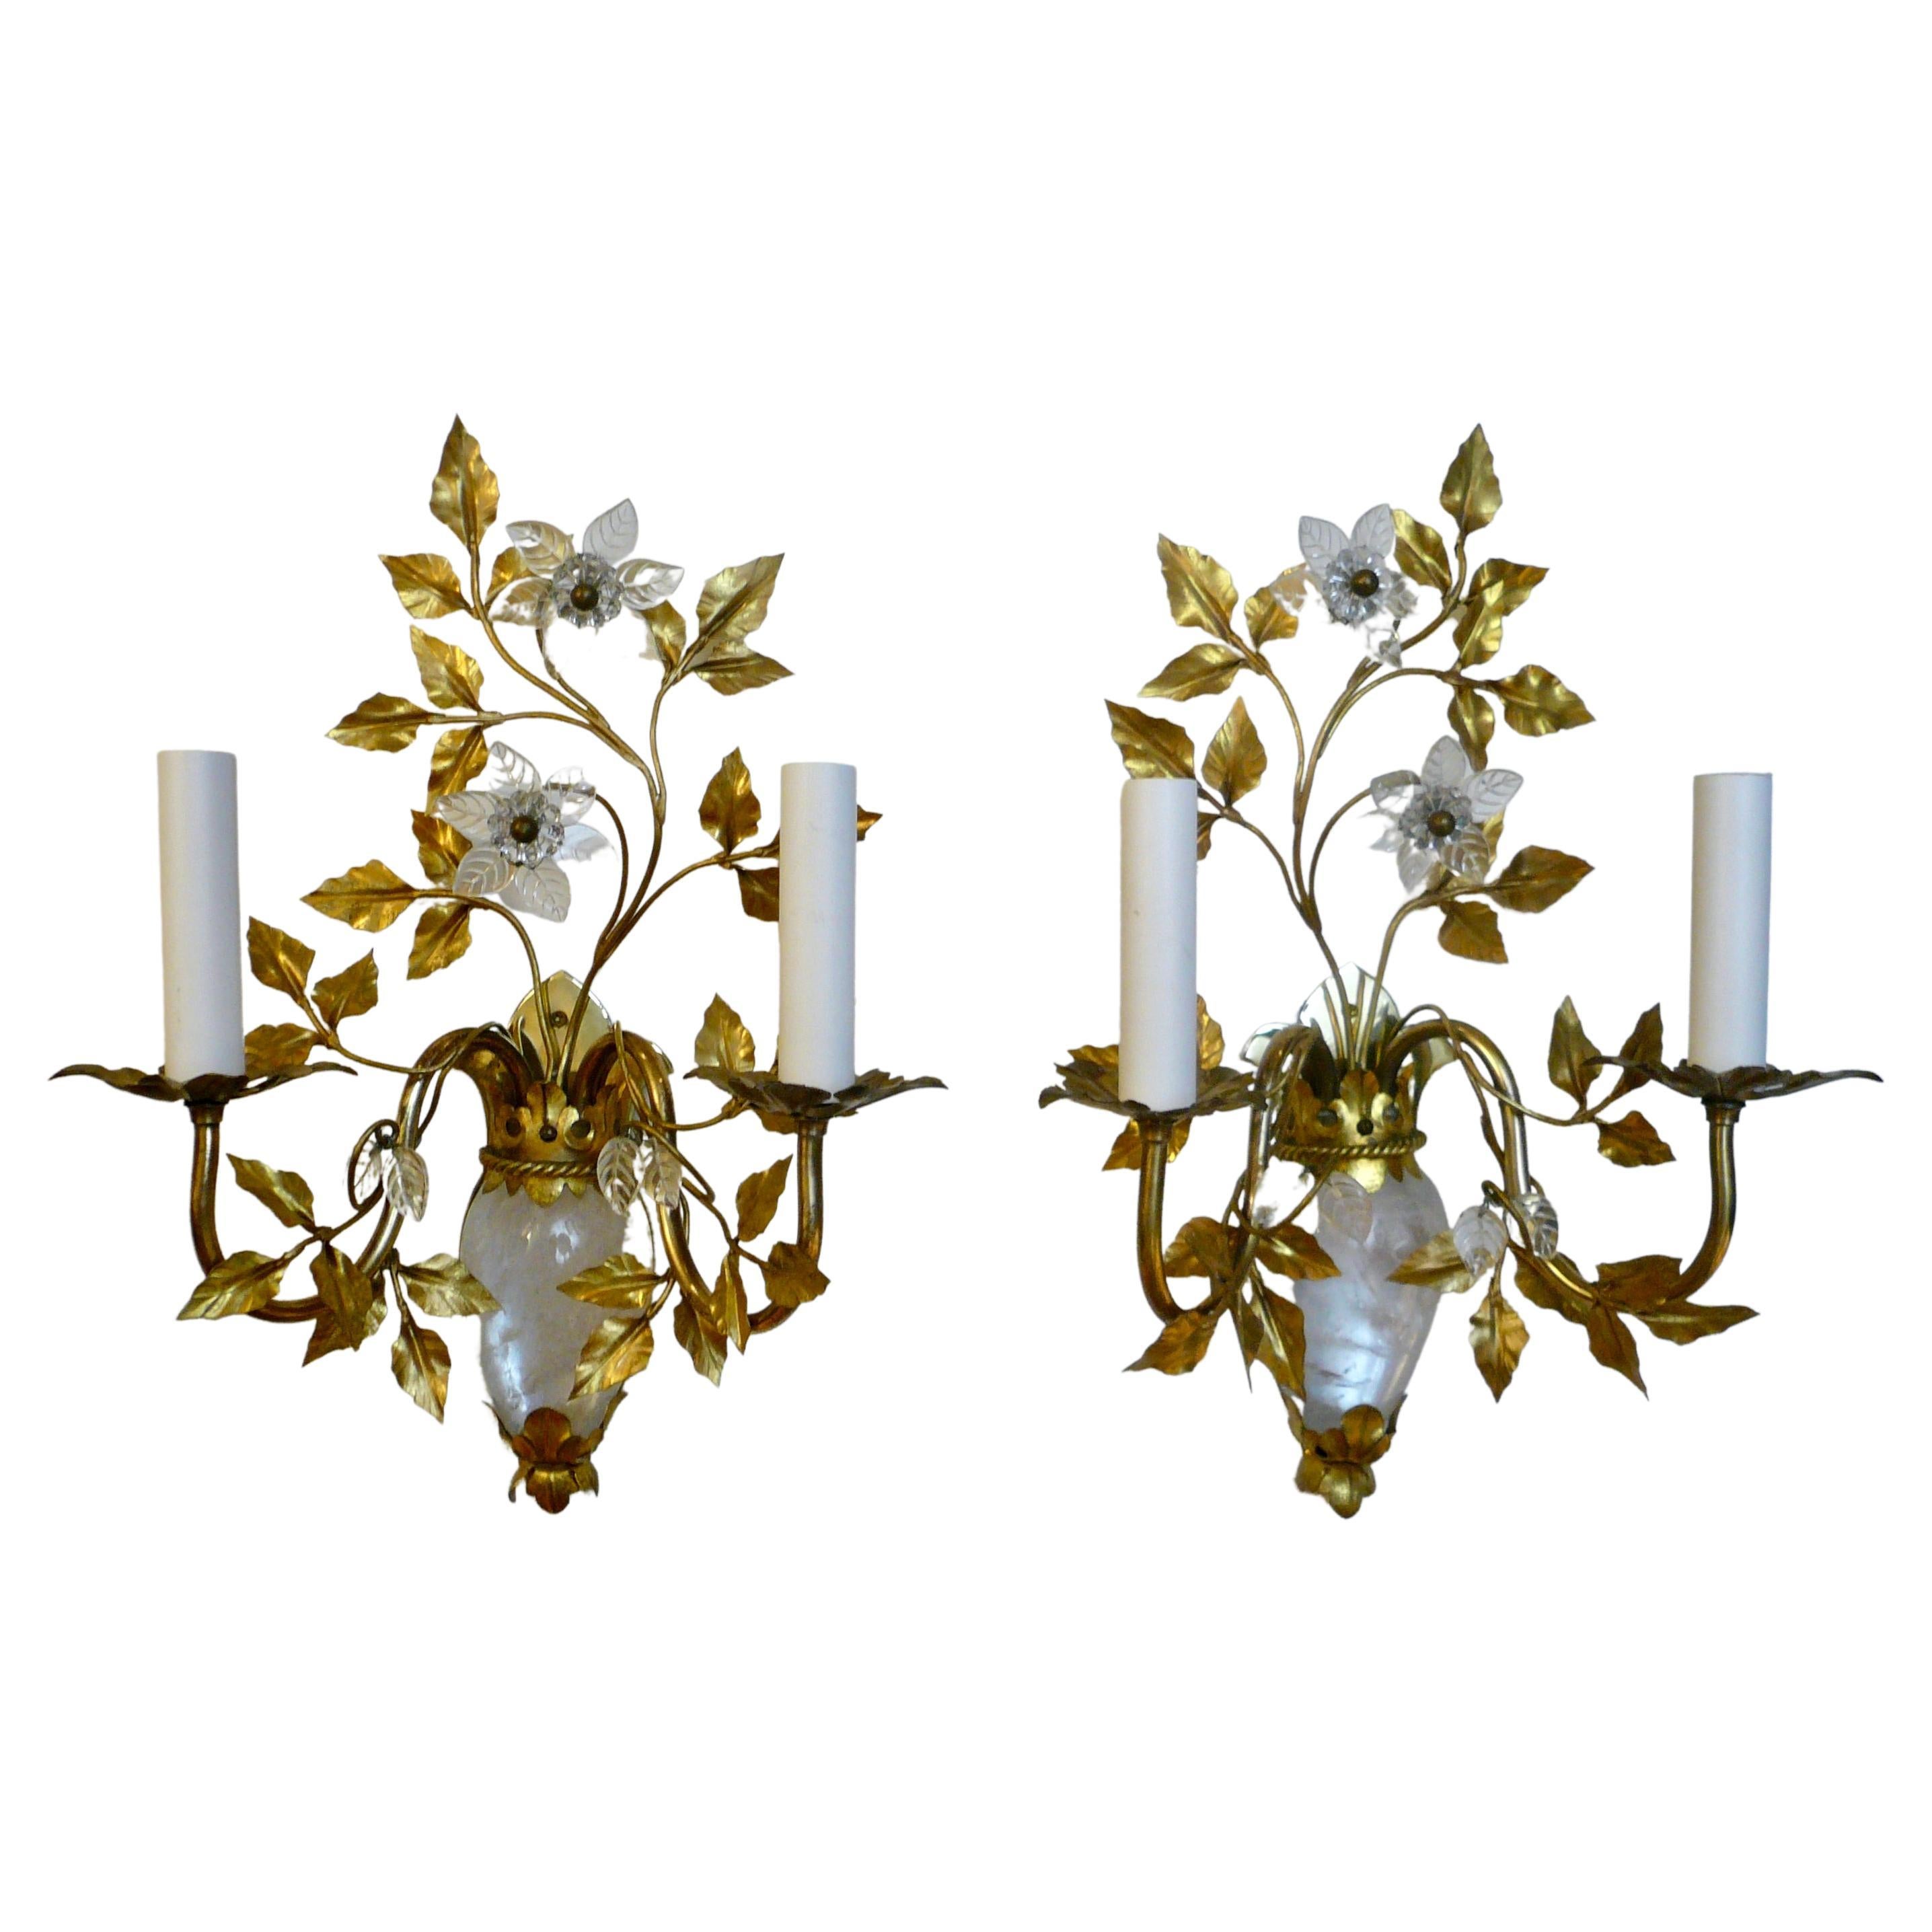 True Pair French Midcentury Rock Crystal Sconces, Attributed to Maison Bagues For Sale